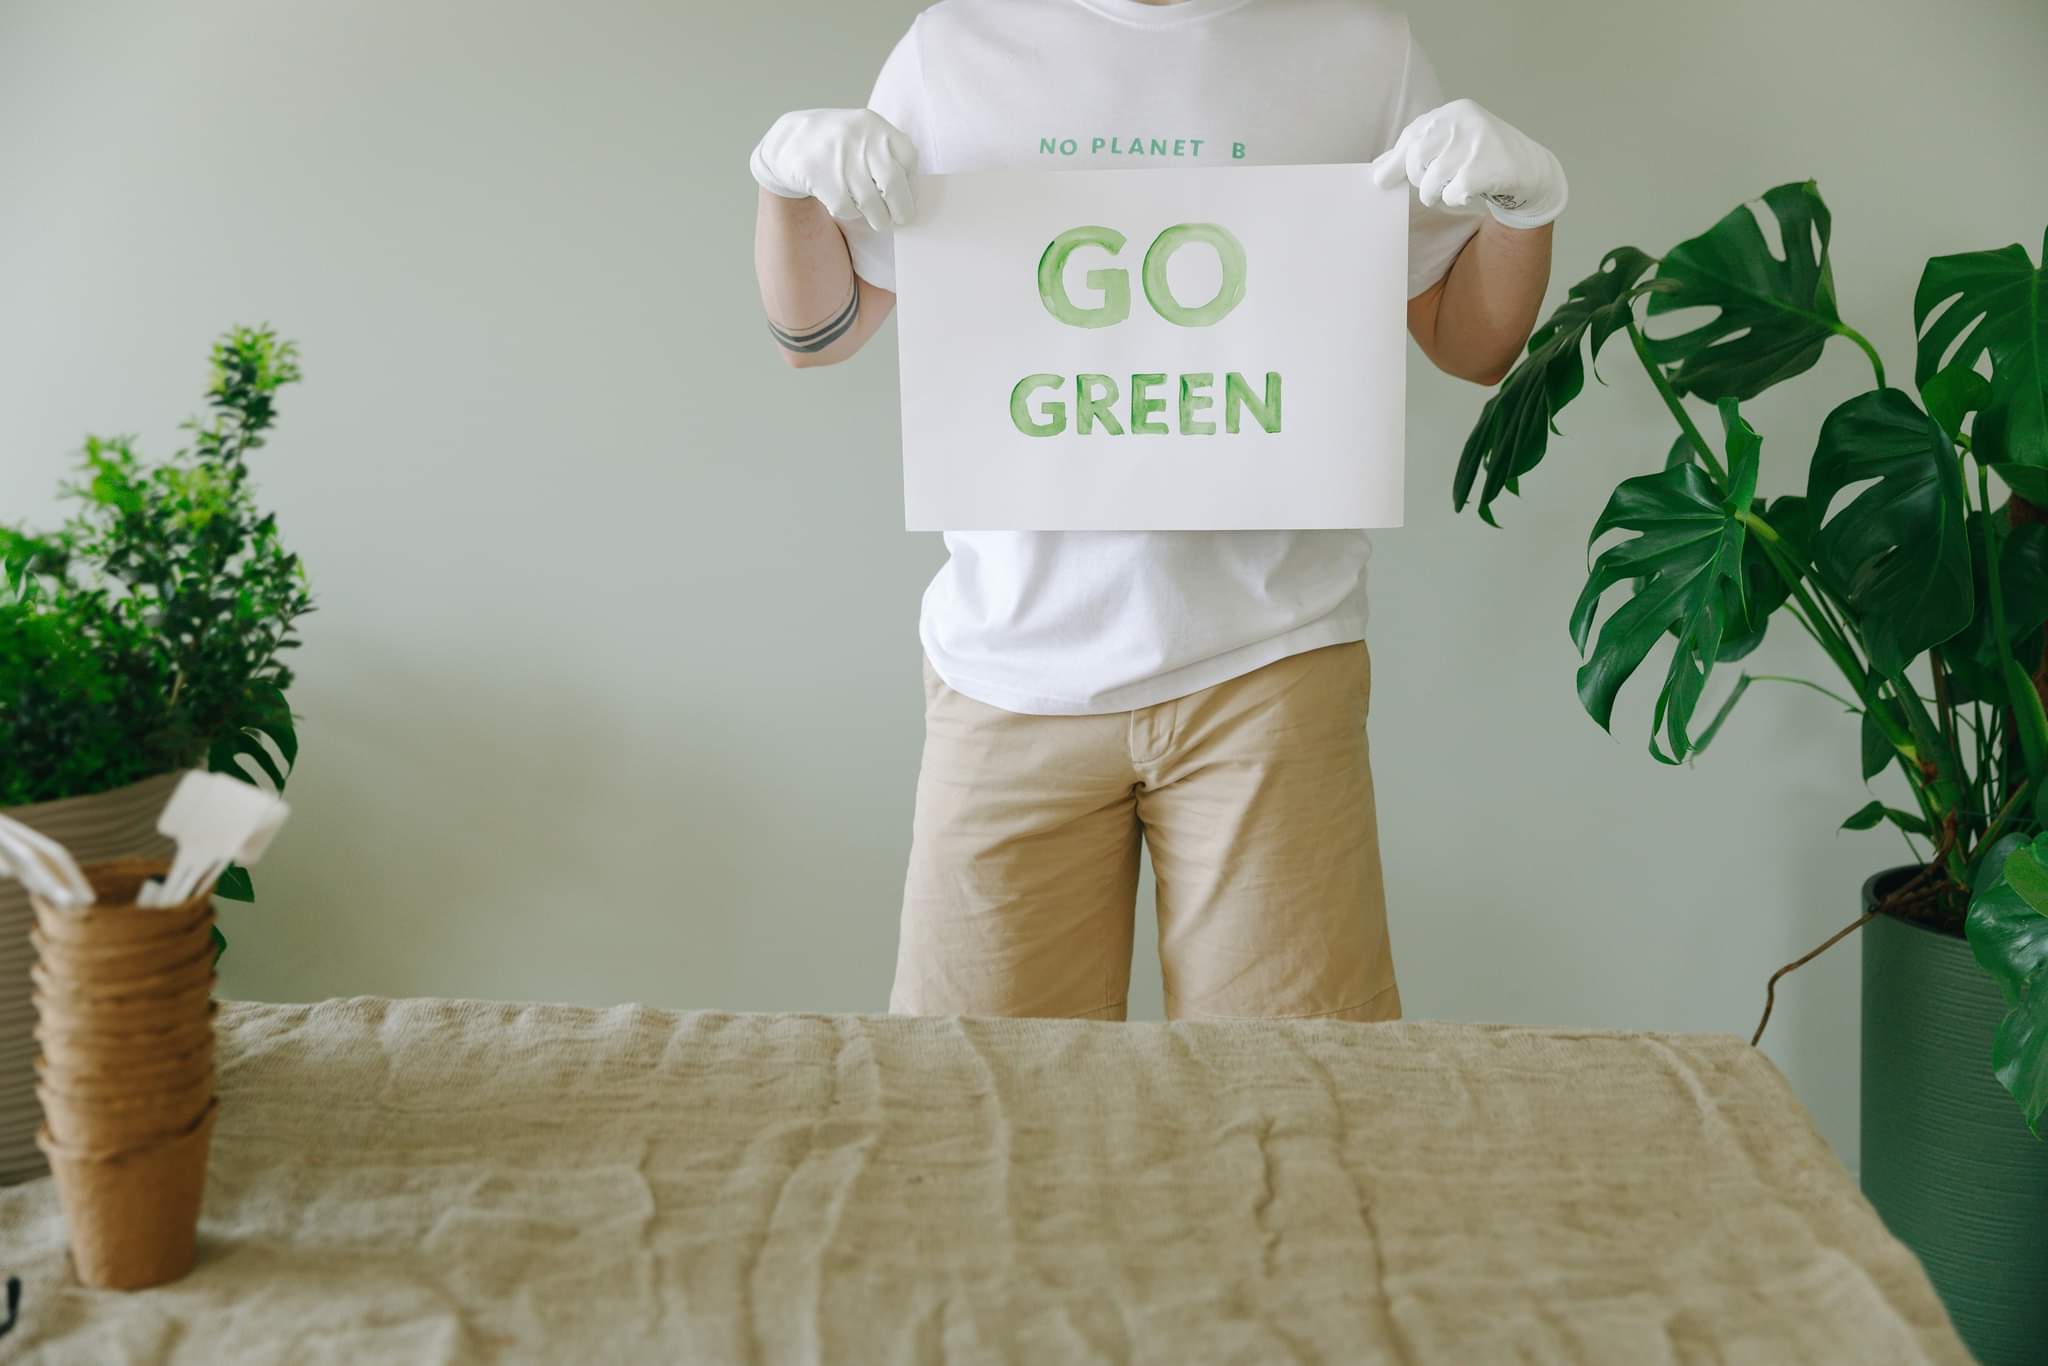 Green ideas and initiatives: Four messages on how to care for the environment